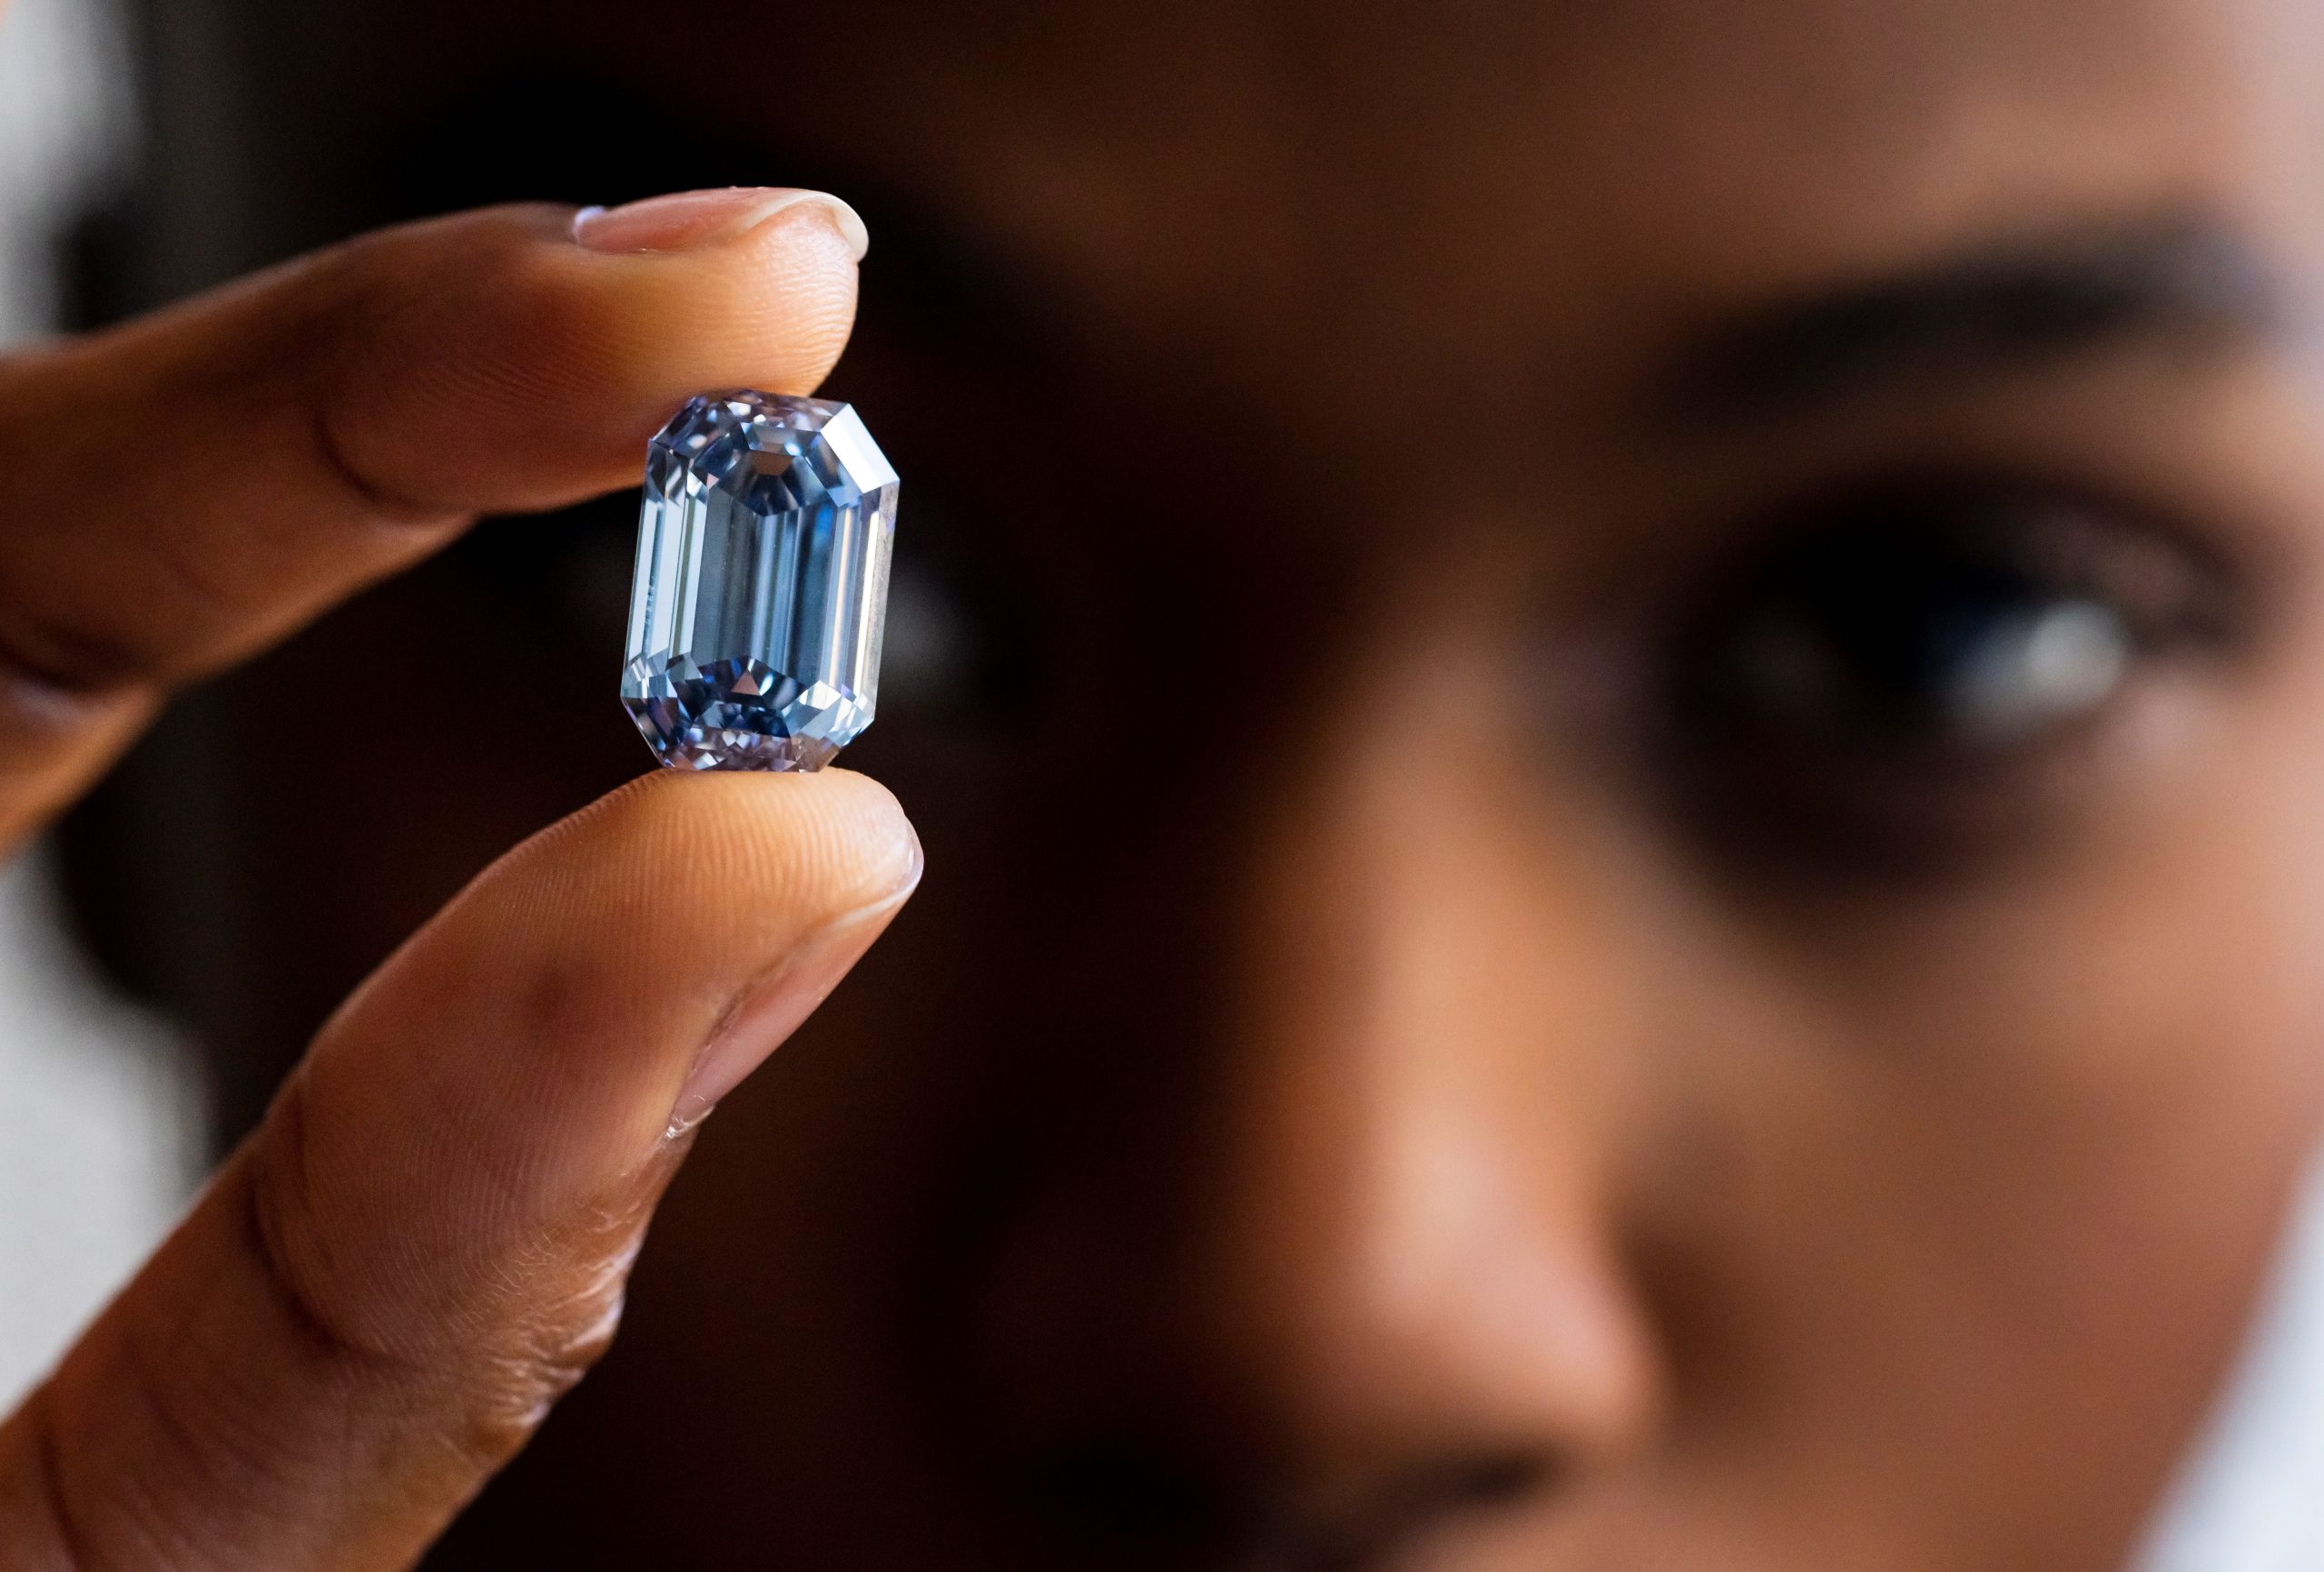 epa09762150 Model Stephany Martins displays the 'De Beers Cullinan Blue' diamond during a press preview at Sotheby's in New York, New York, USA, 15 February 2022. The gem, with 15.10 carats, is the largest blue diamond to ever appear at auction and is estimated to sell for 48 million USD (42.2 million EUR) during an auction at Sotheby's Hong Kong in April 2022.  EPA/JUSTIN LANE